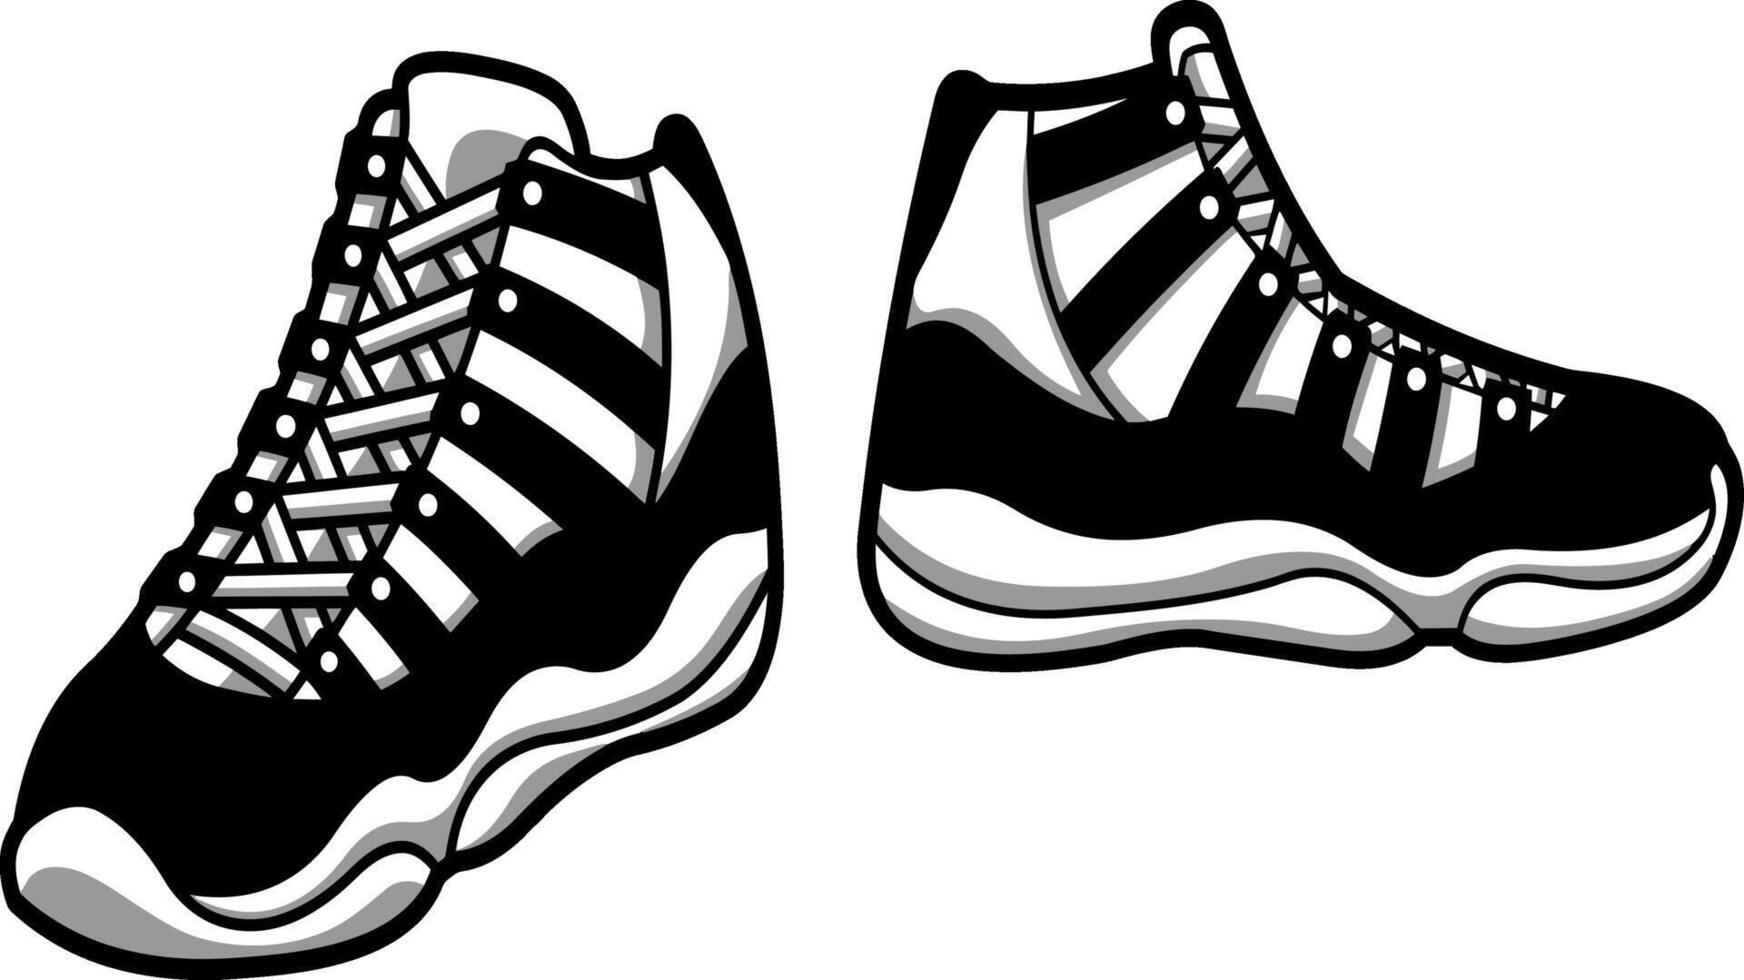 Black And White Cartoon Modern Sneakers. Vector Hand Drawn Illustration Isolated On Transparent Background